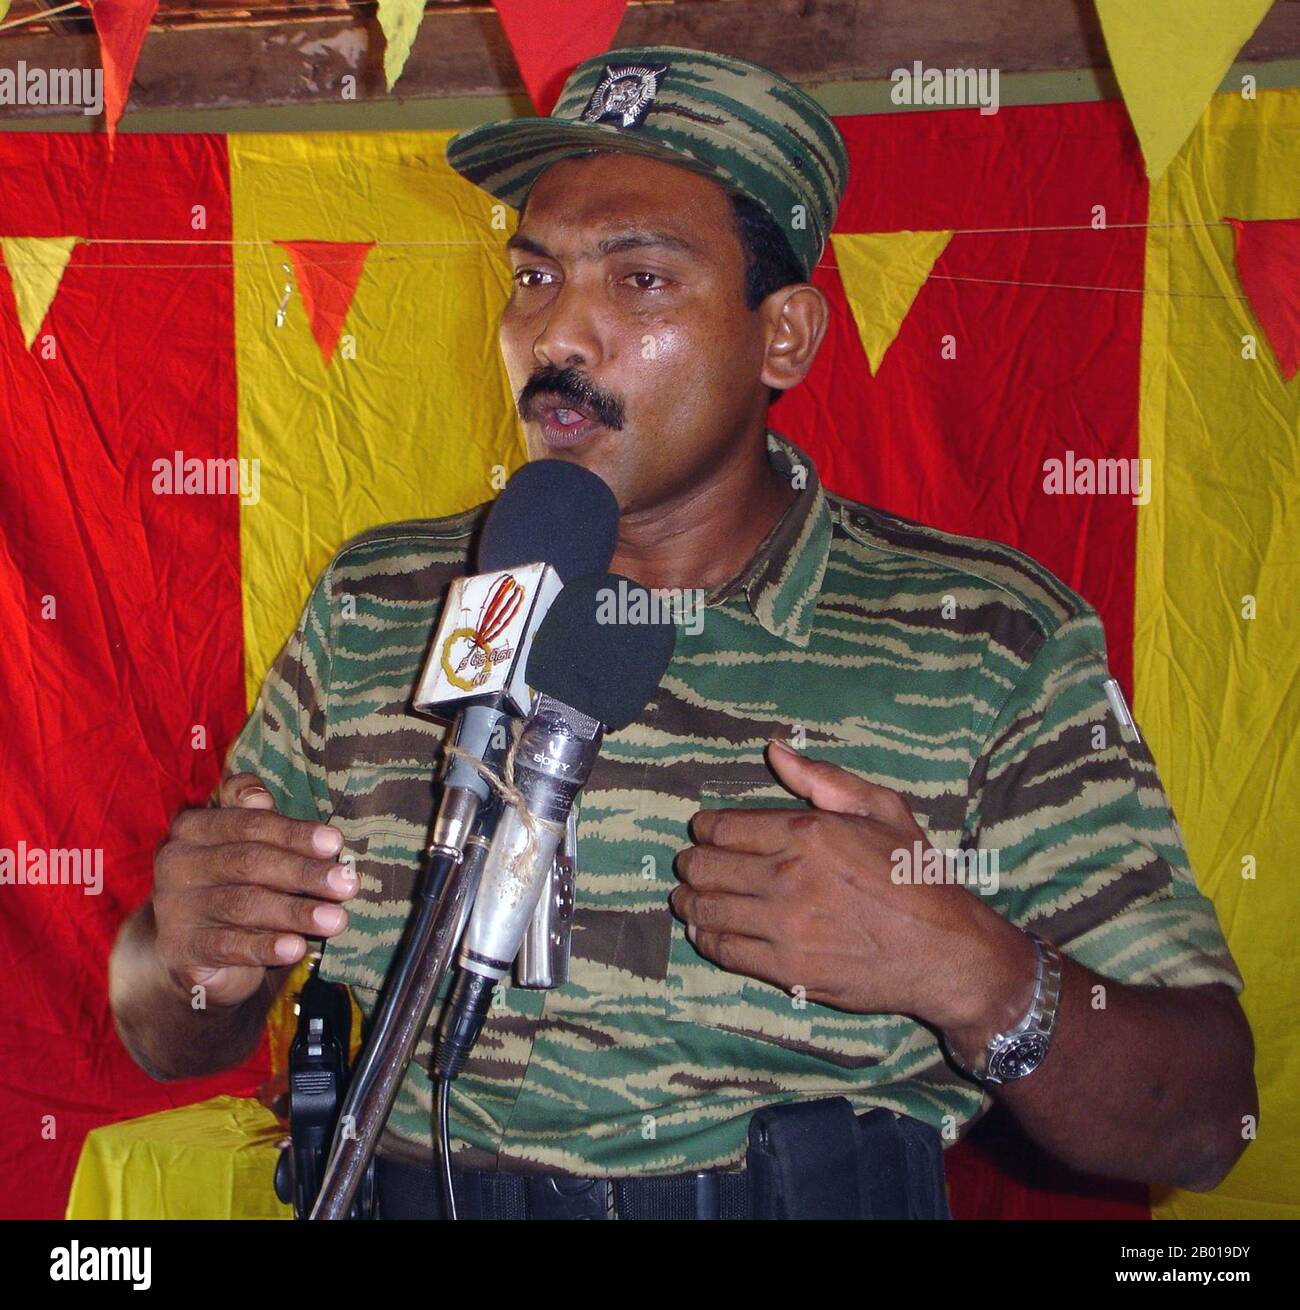 Sri Lanka: Senior LTTE Cadre K. V. Balakumaran addressing a Tamil Tiger meeting, c. 2008.  V. Balakumaran used to be one of the two senior leaders of the Eelam Revolutionary Organisation of Students (EROS). In 1990 he and a large portion of EROS members left the organisation and joined the Liberation Tigers of Tamil Eelam (LTTE). He was active in LTTE's political division. On January 29, 2009, during the last phase of the Sri Lanka Civil War, Balakumaran was seriously wounded in an assault by soldiers of the Sri Lanka army. He was captured during the last hours of the civil war. Stock Photo